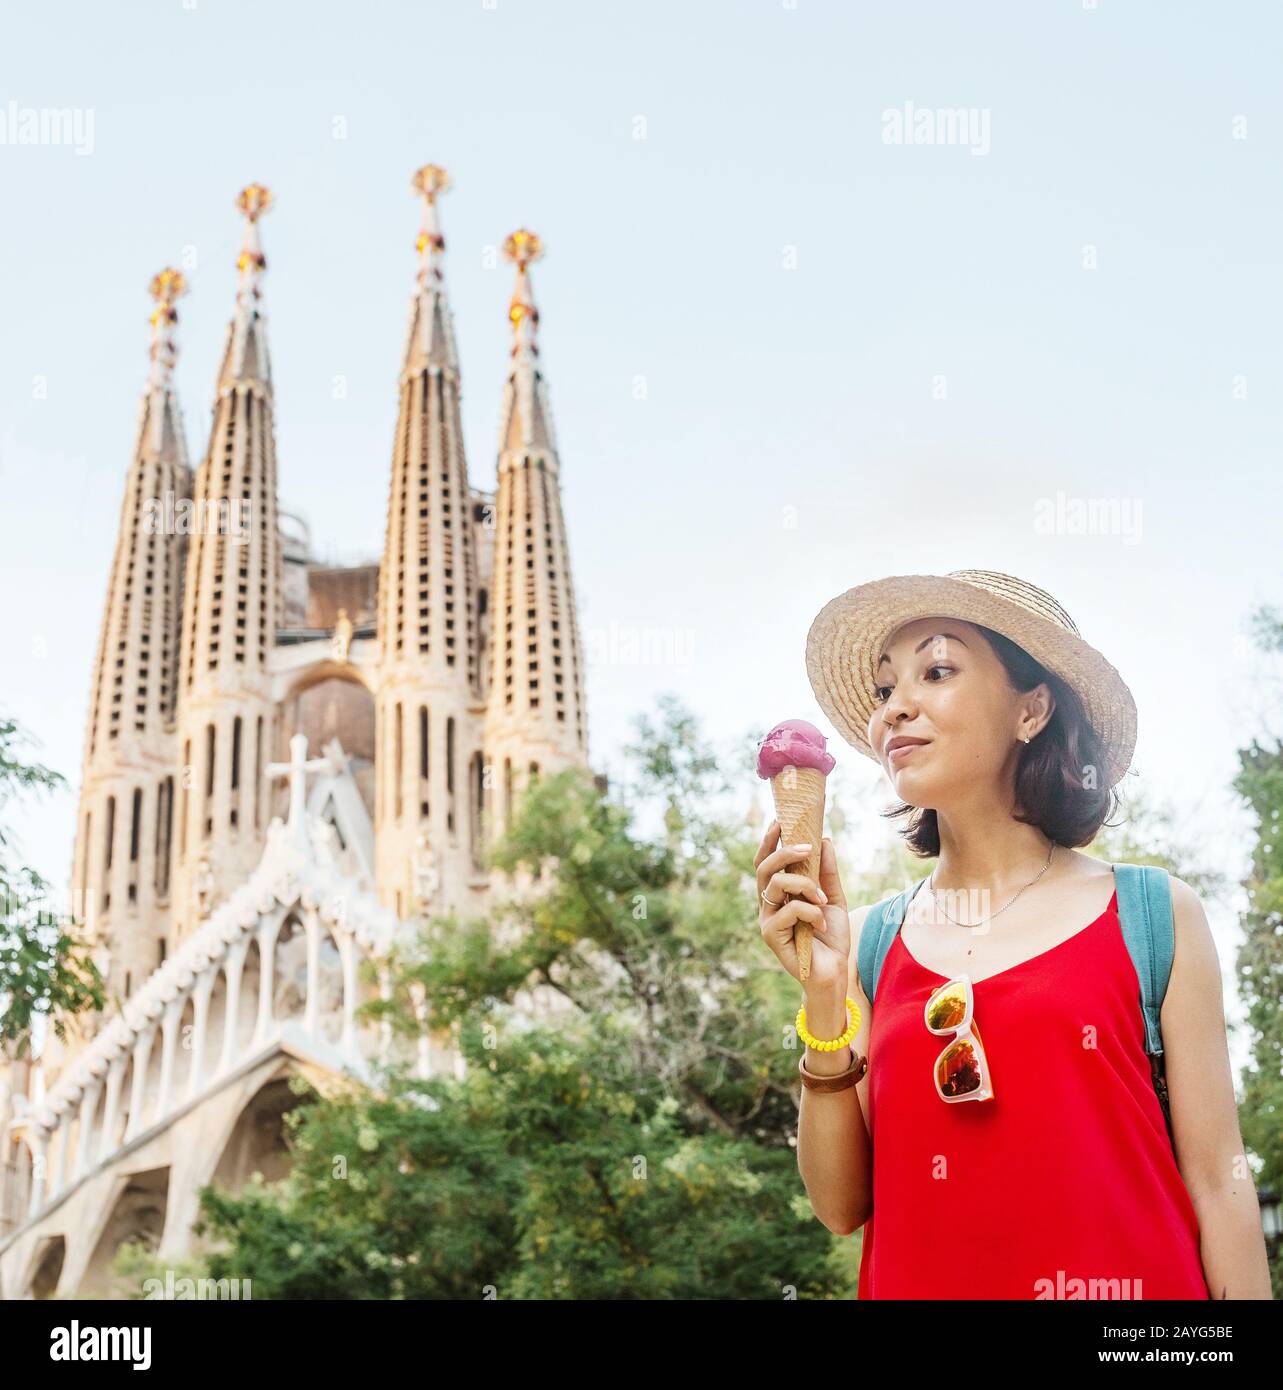 29 JULY 2018, BARCELONA, SPAIN: Young woman tourist in front of the famous Sagrada Familia landmark in Barcelona Stock Photo